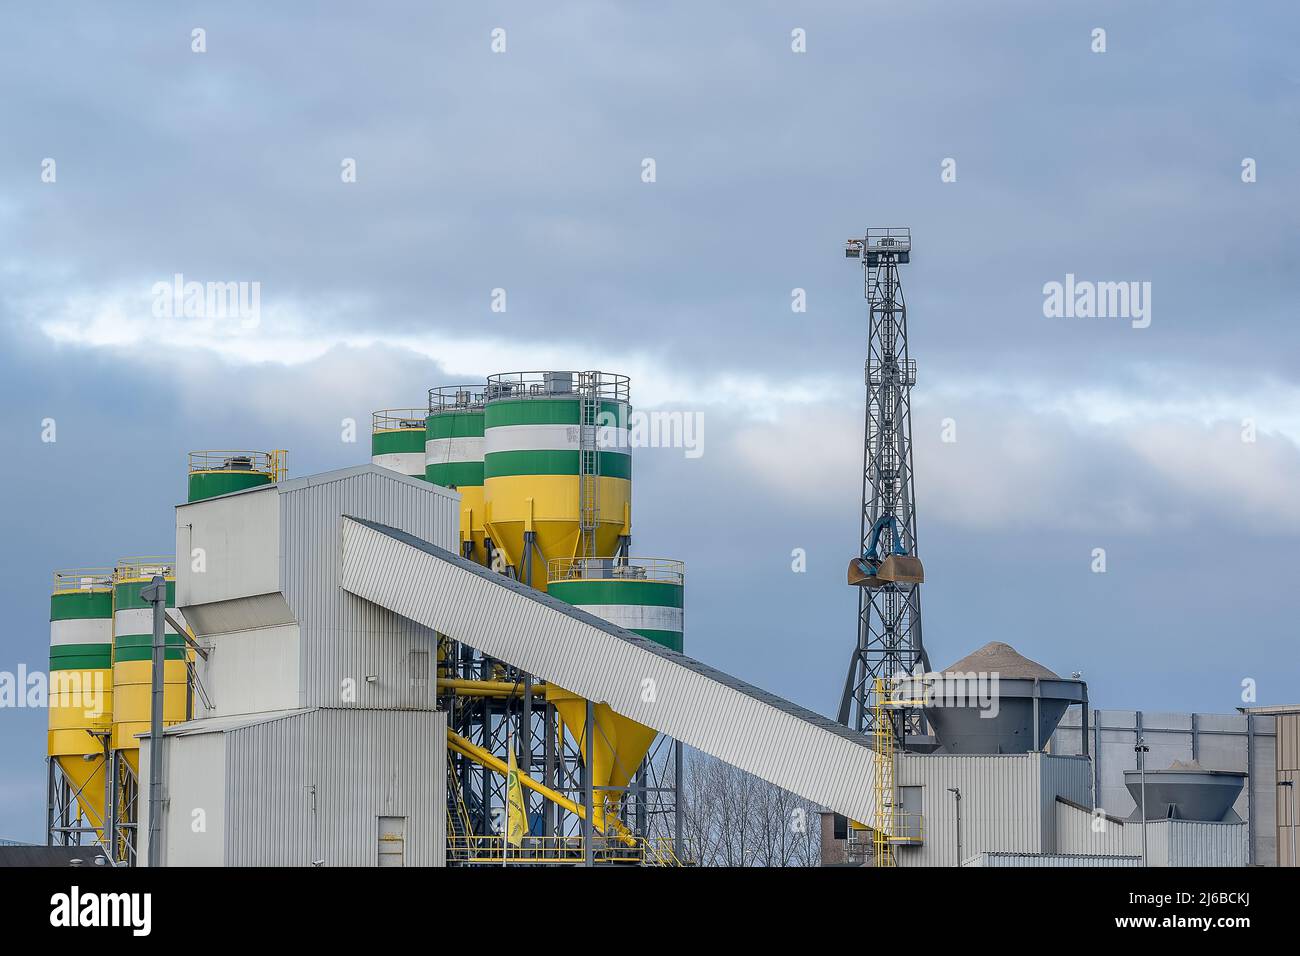 Cement factory with cranes for transporting raw materials. The silos in which the raw materials are mixed into cement and the conveyor belts are clear Stock Photo